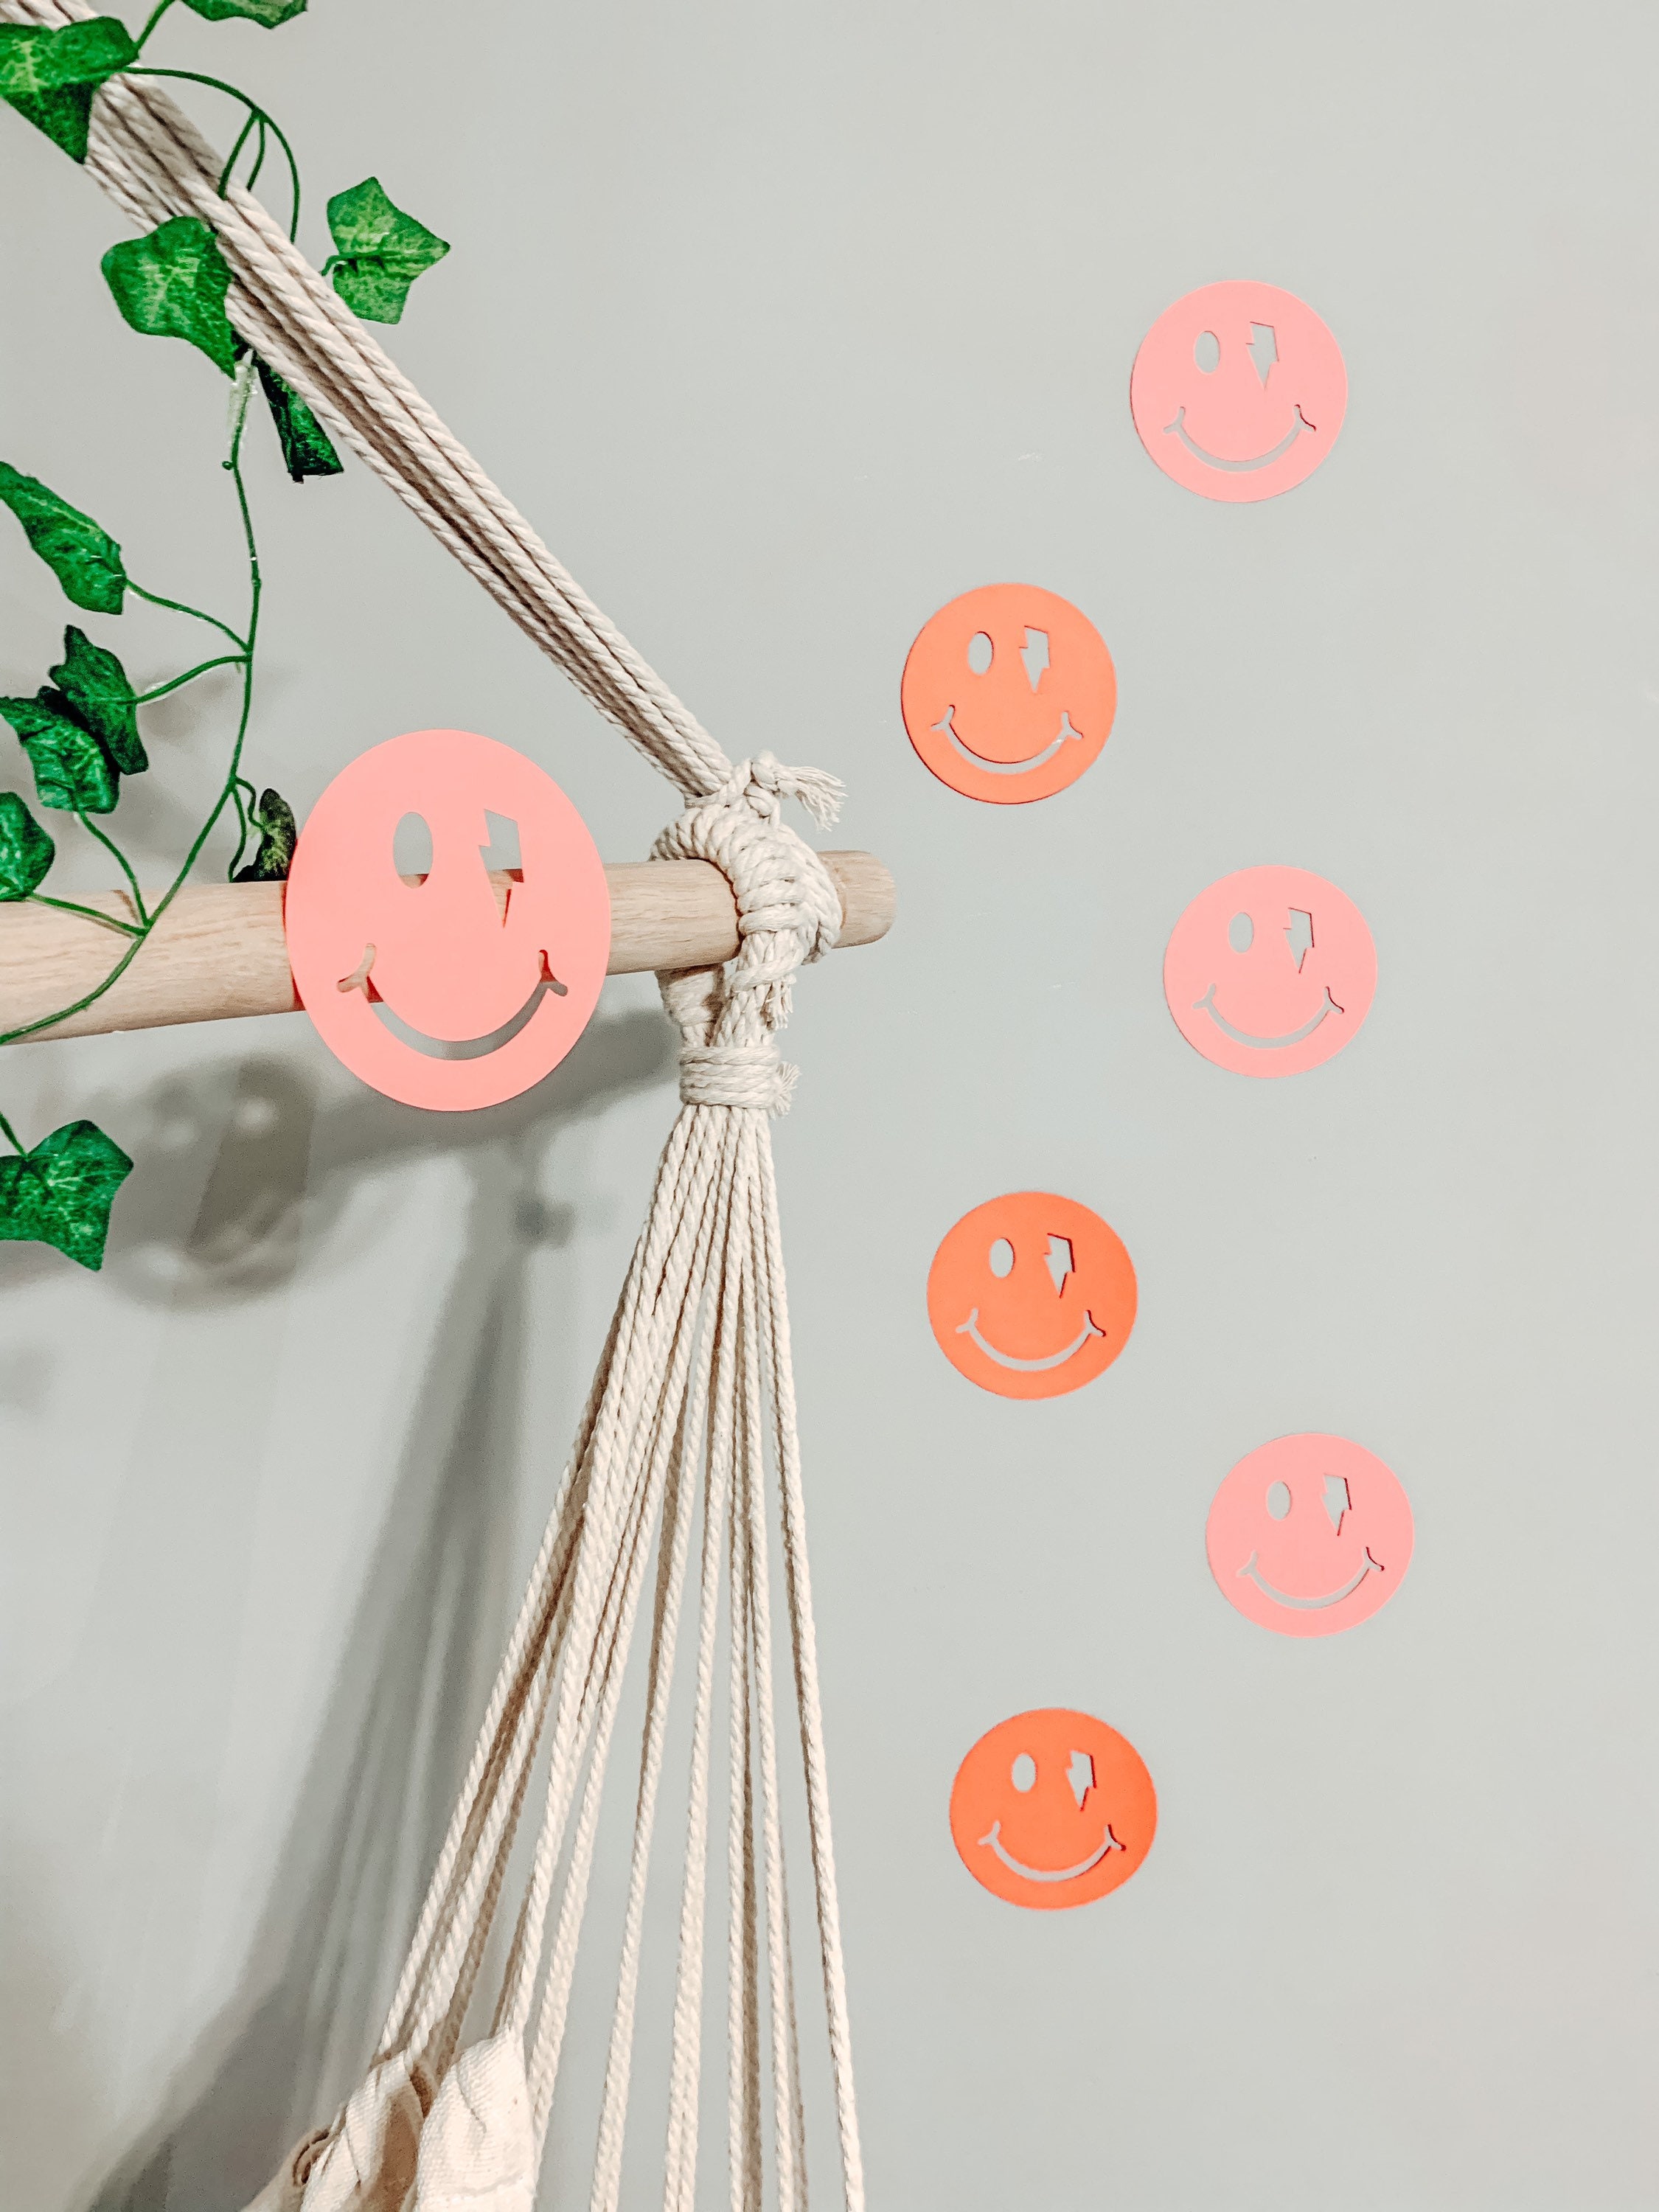 Pink Smiley Face Preppy Room Decor Aesthetic/ Wall / Wallpaper